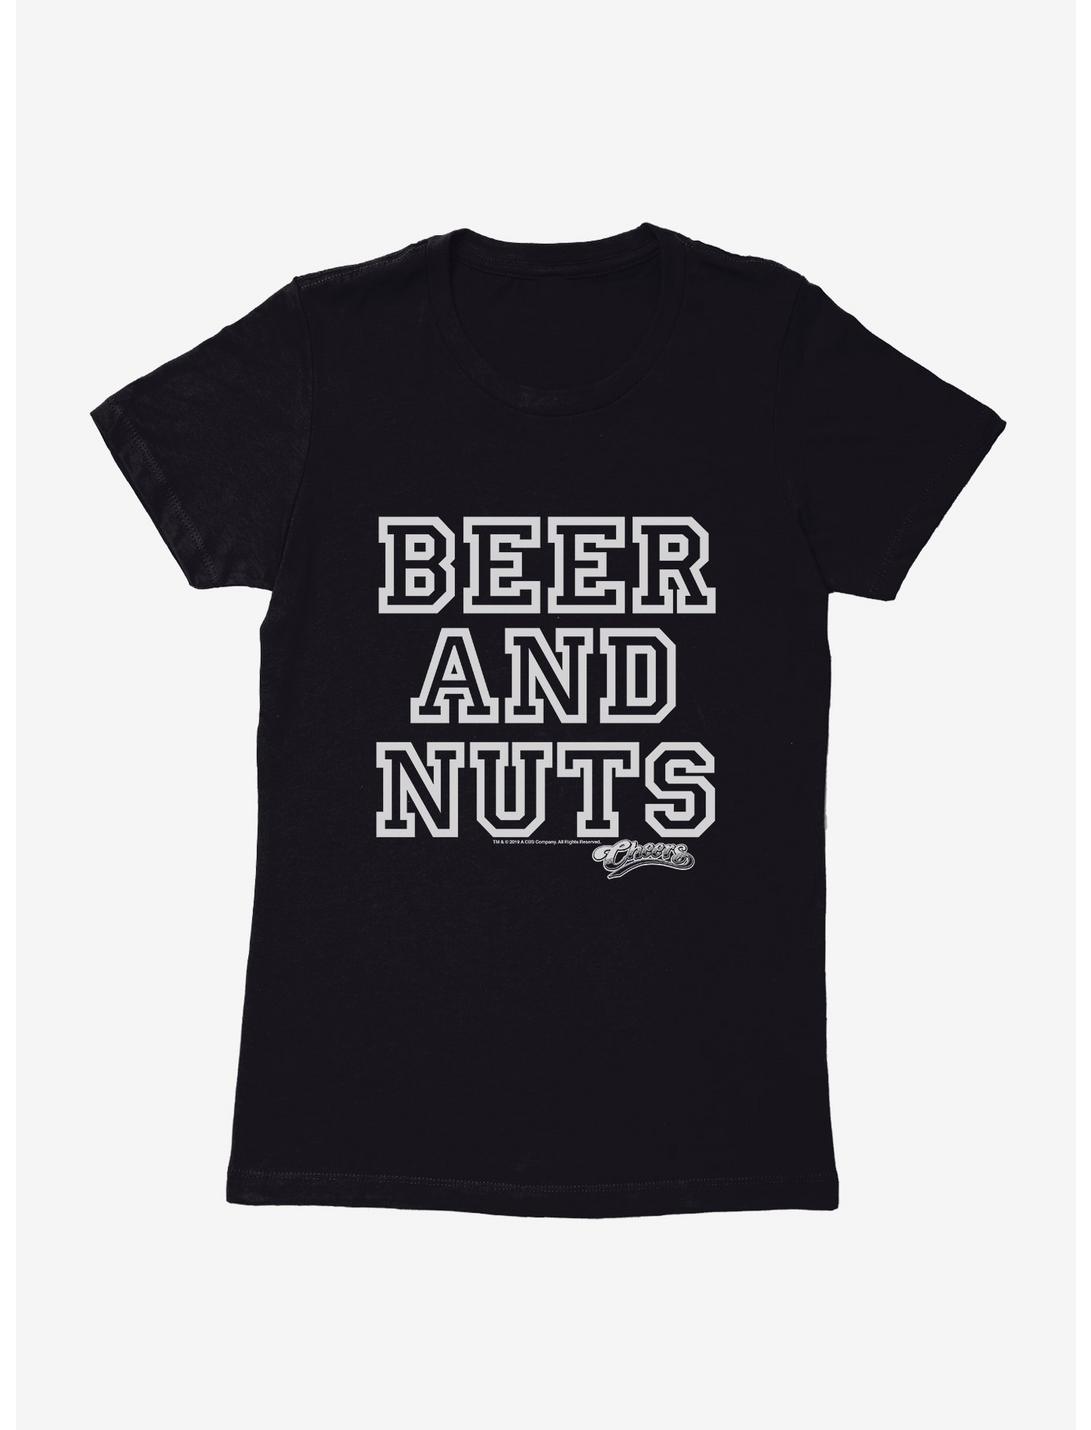 Cheers Beer And Nuts Womens T-Shirt, BLACK, hi-res